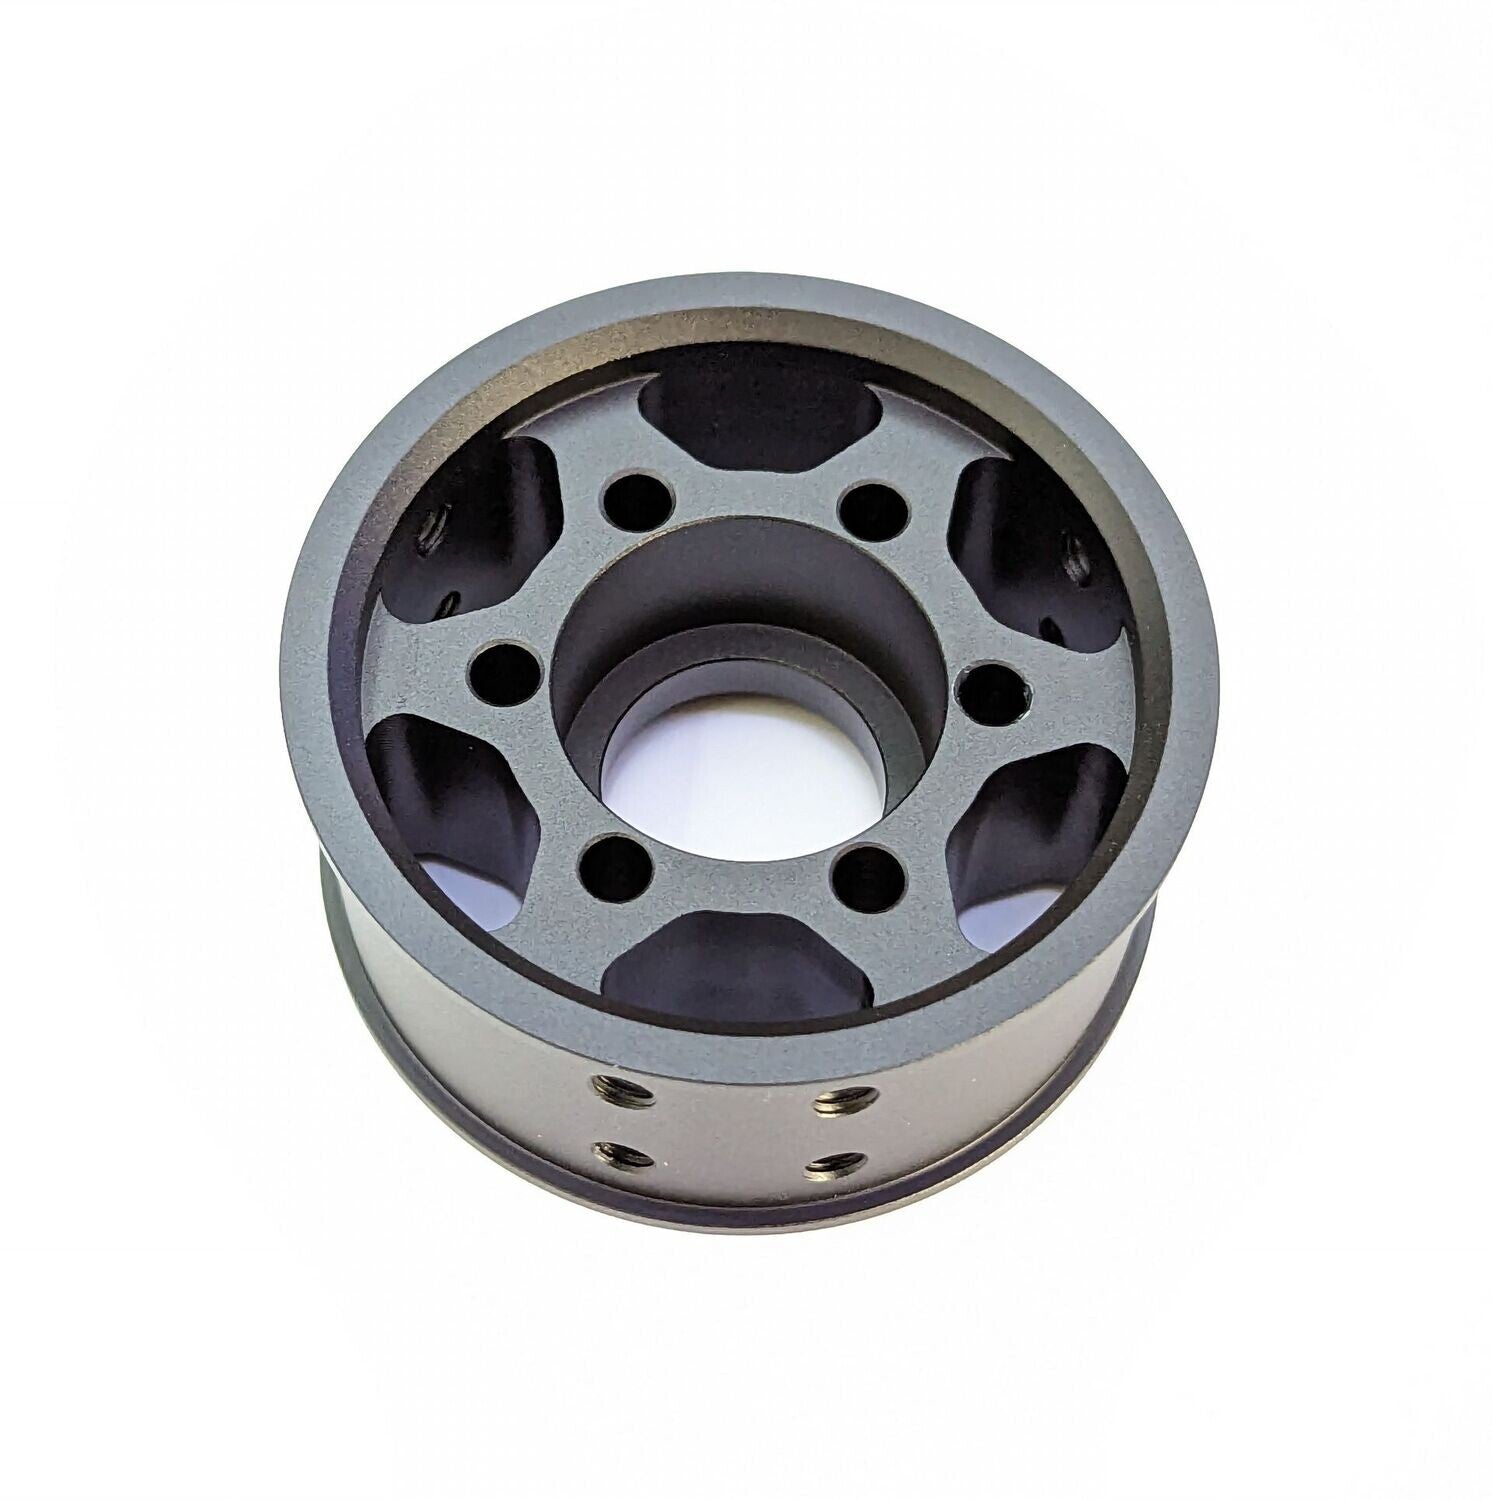 3" Swerve Aluminum Billet Wheel for MAXSwerve